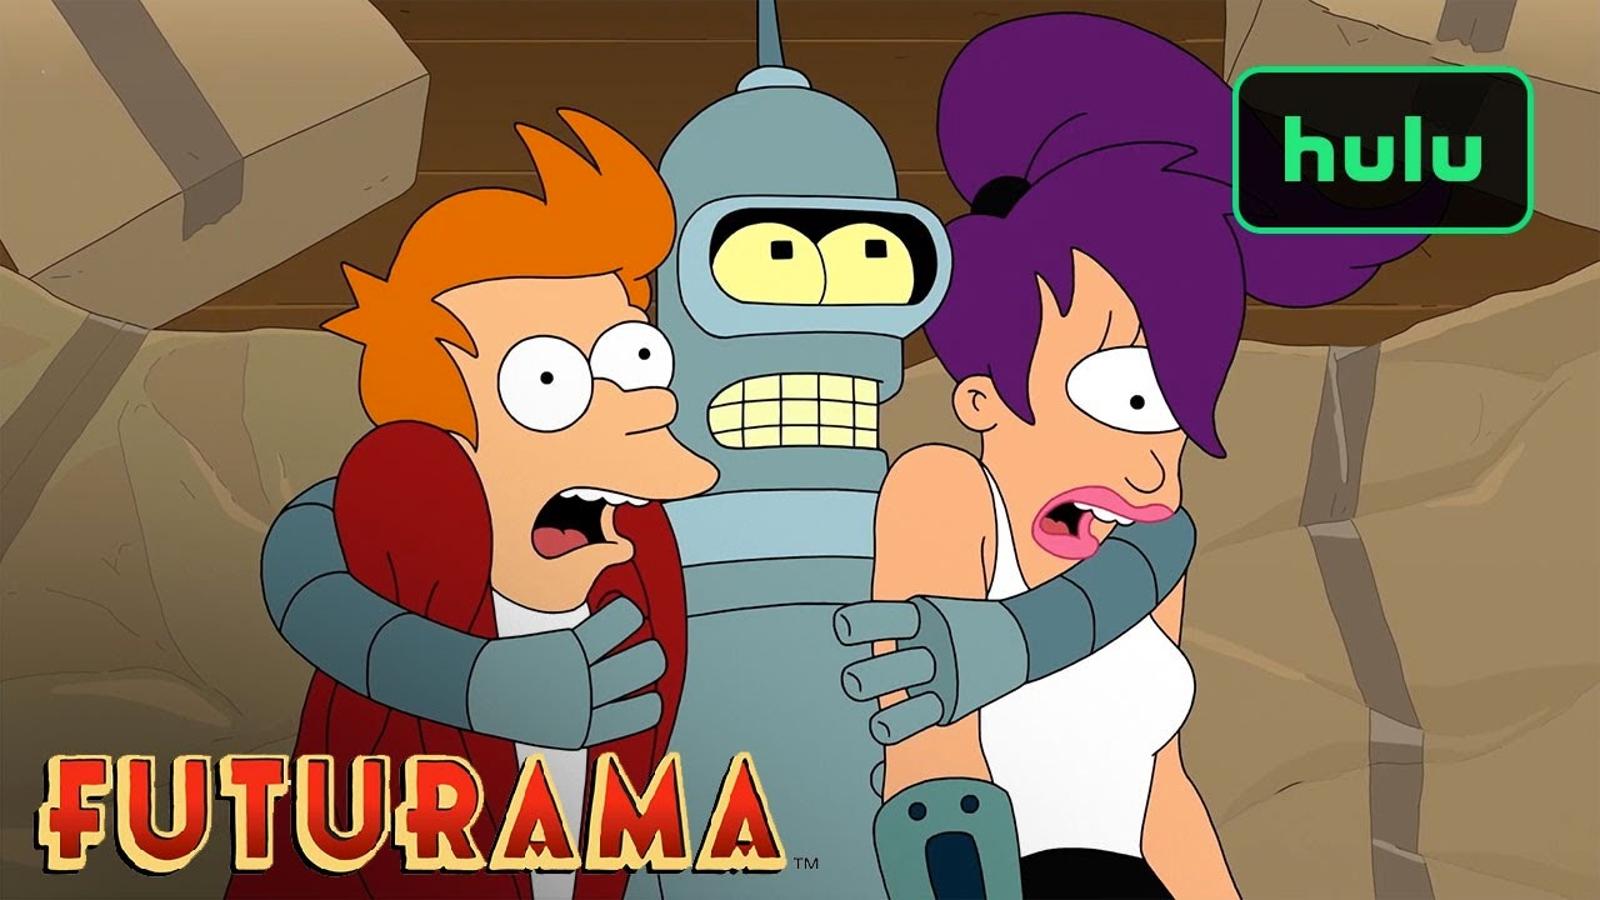 Futurama trailer thumbnail for new episodes in 2023, with Hulu logo in corner